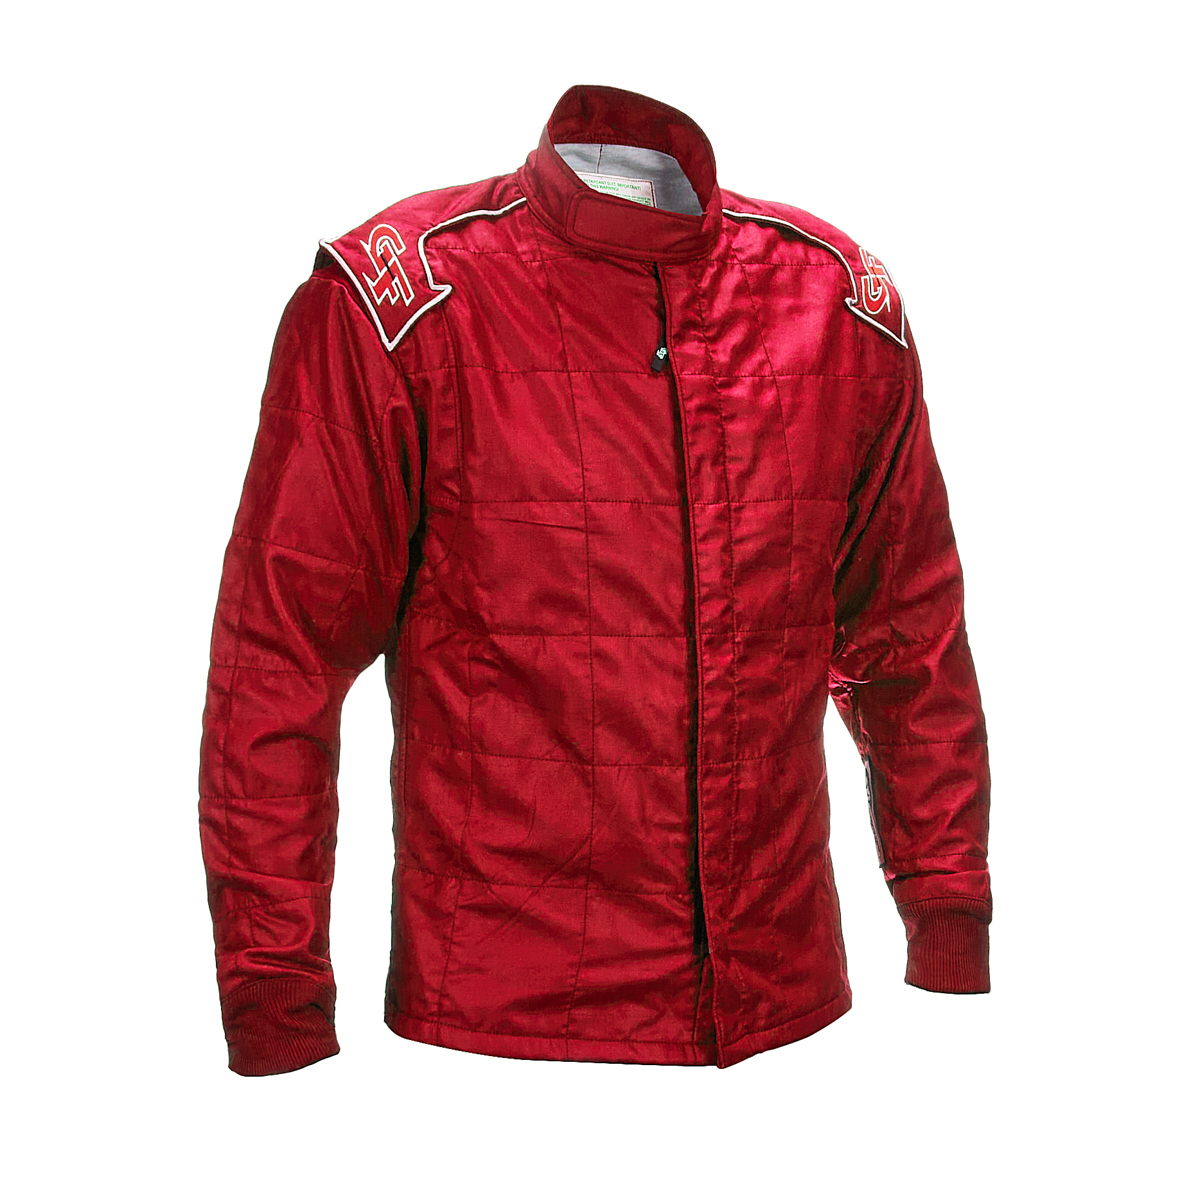 G-Limit SFI 5 Jacket XLG RD - 35452XLGRD